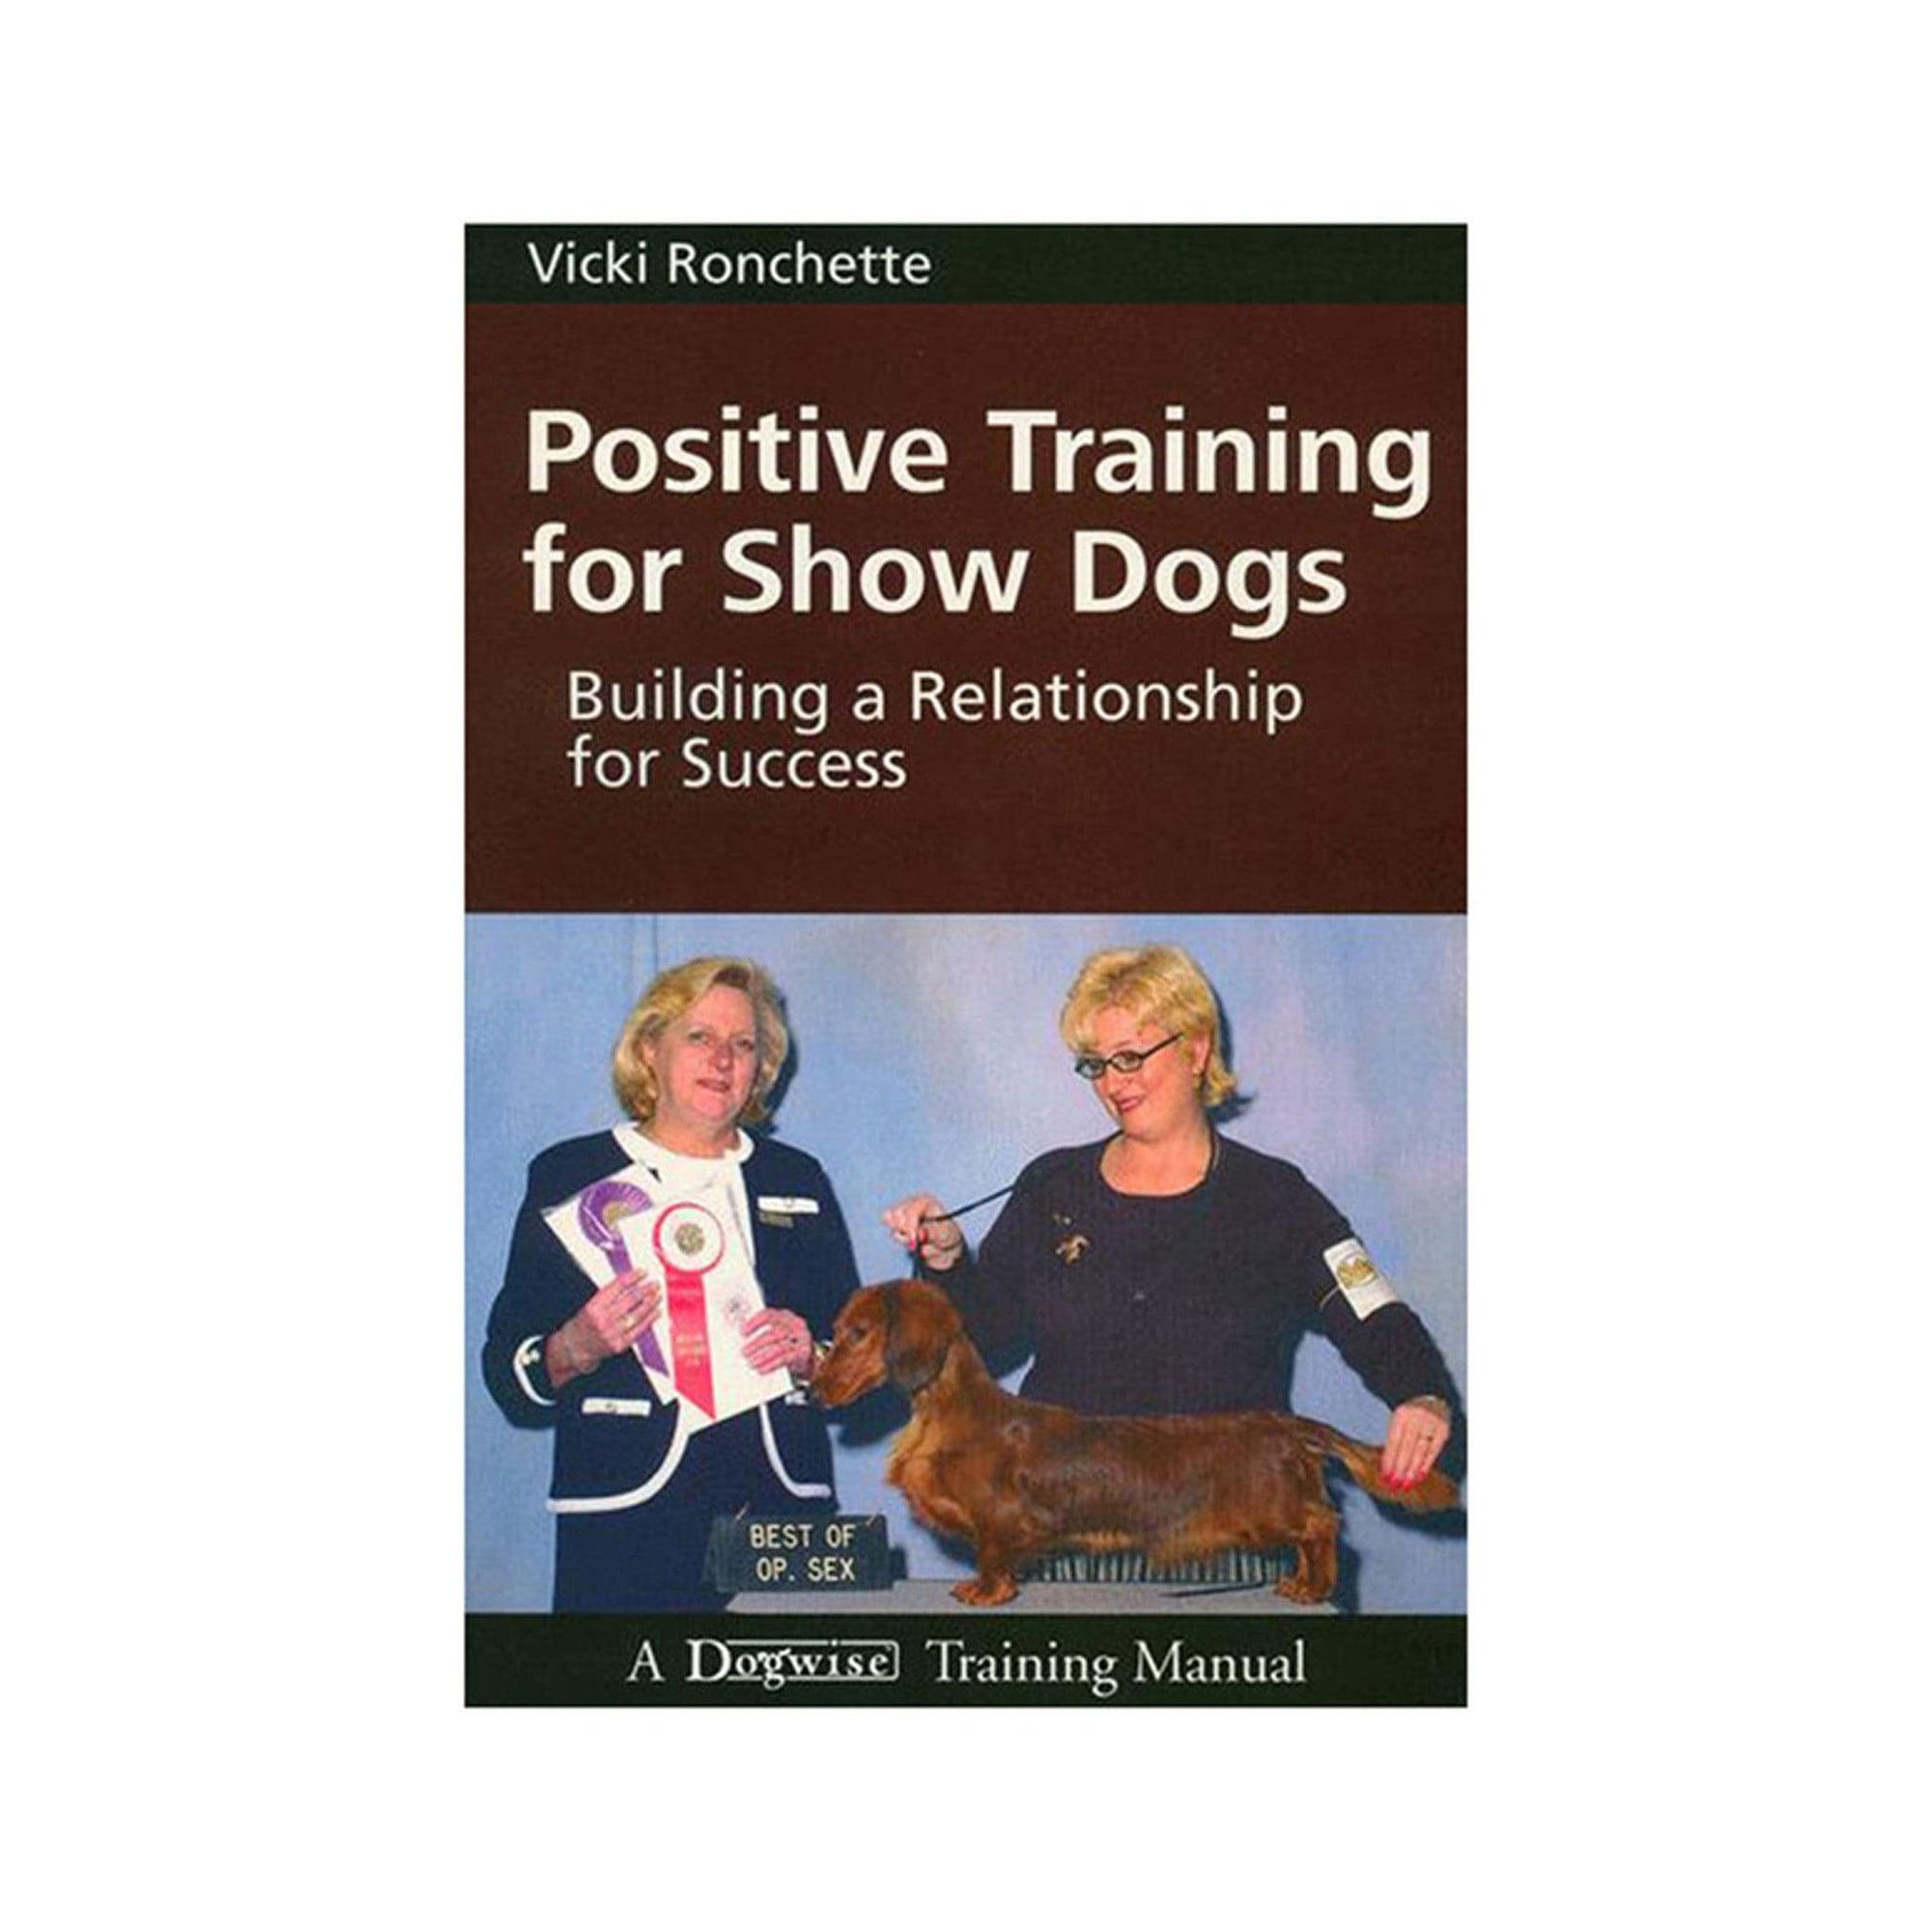 Positive Training for Show Dogs..Building a Relationship for Success   e-book